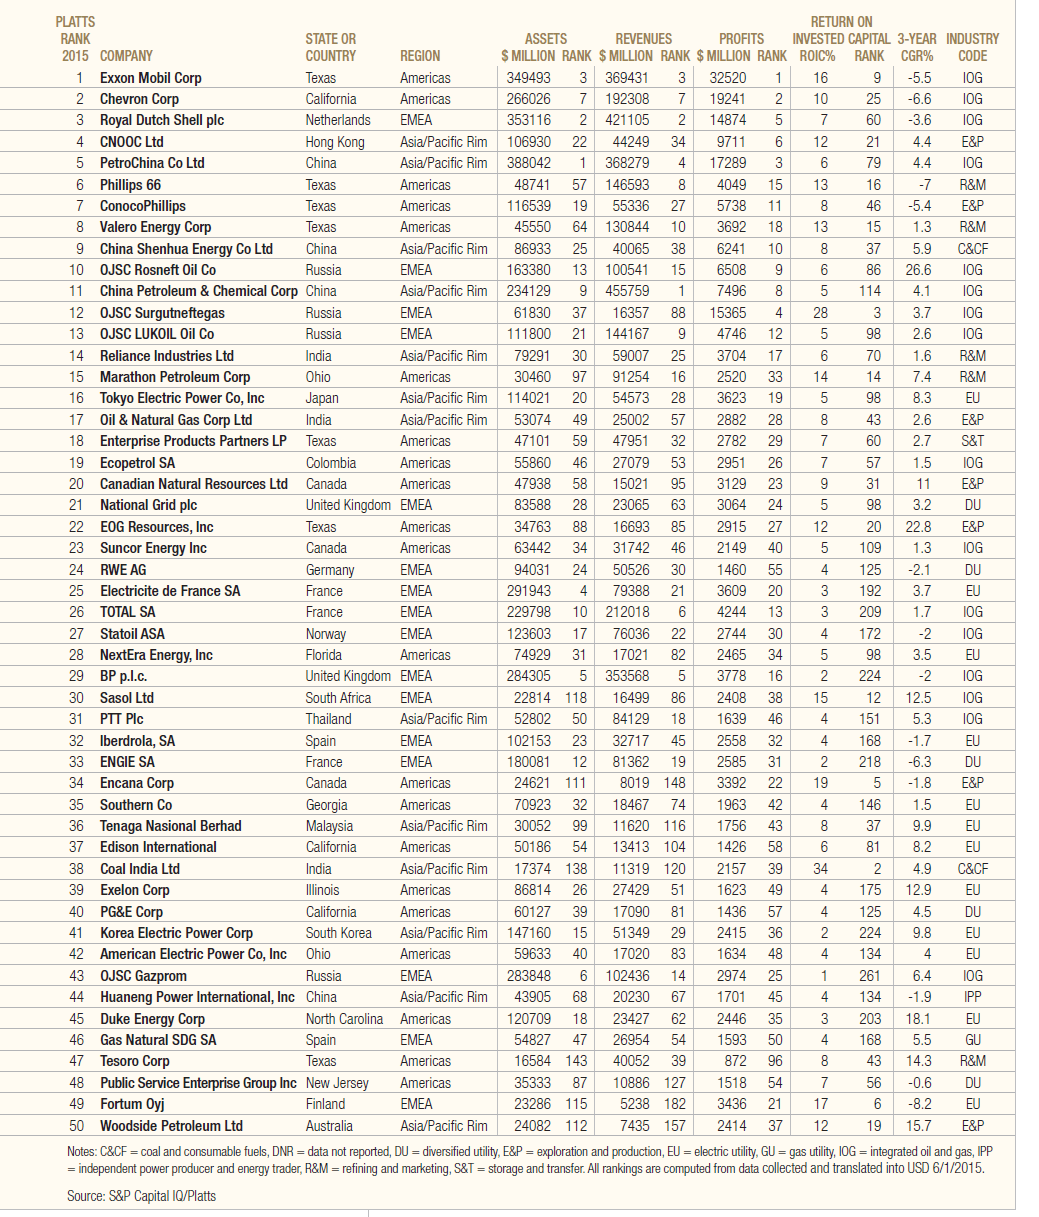 Platts Top 250 Energy Companies for 2015-Page 1